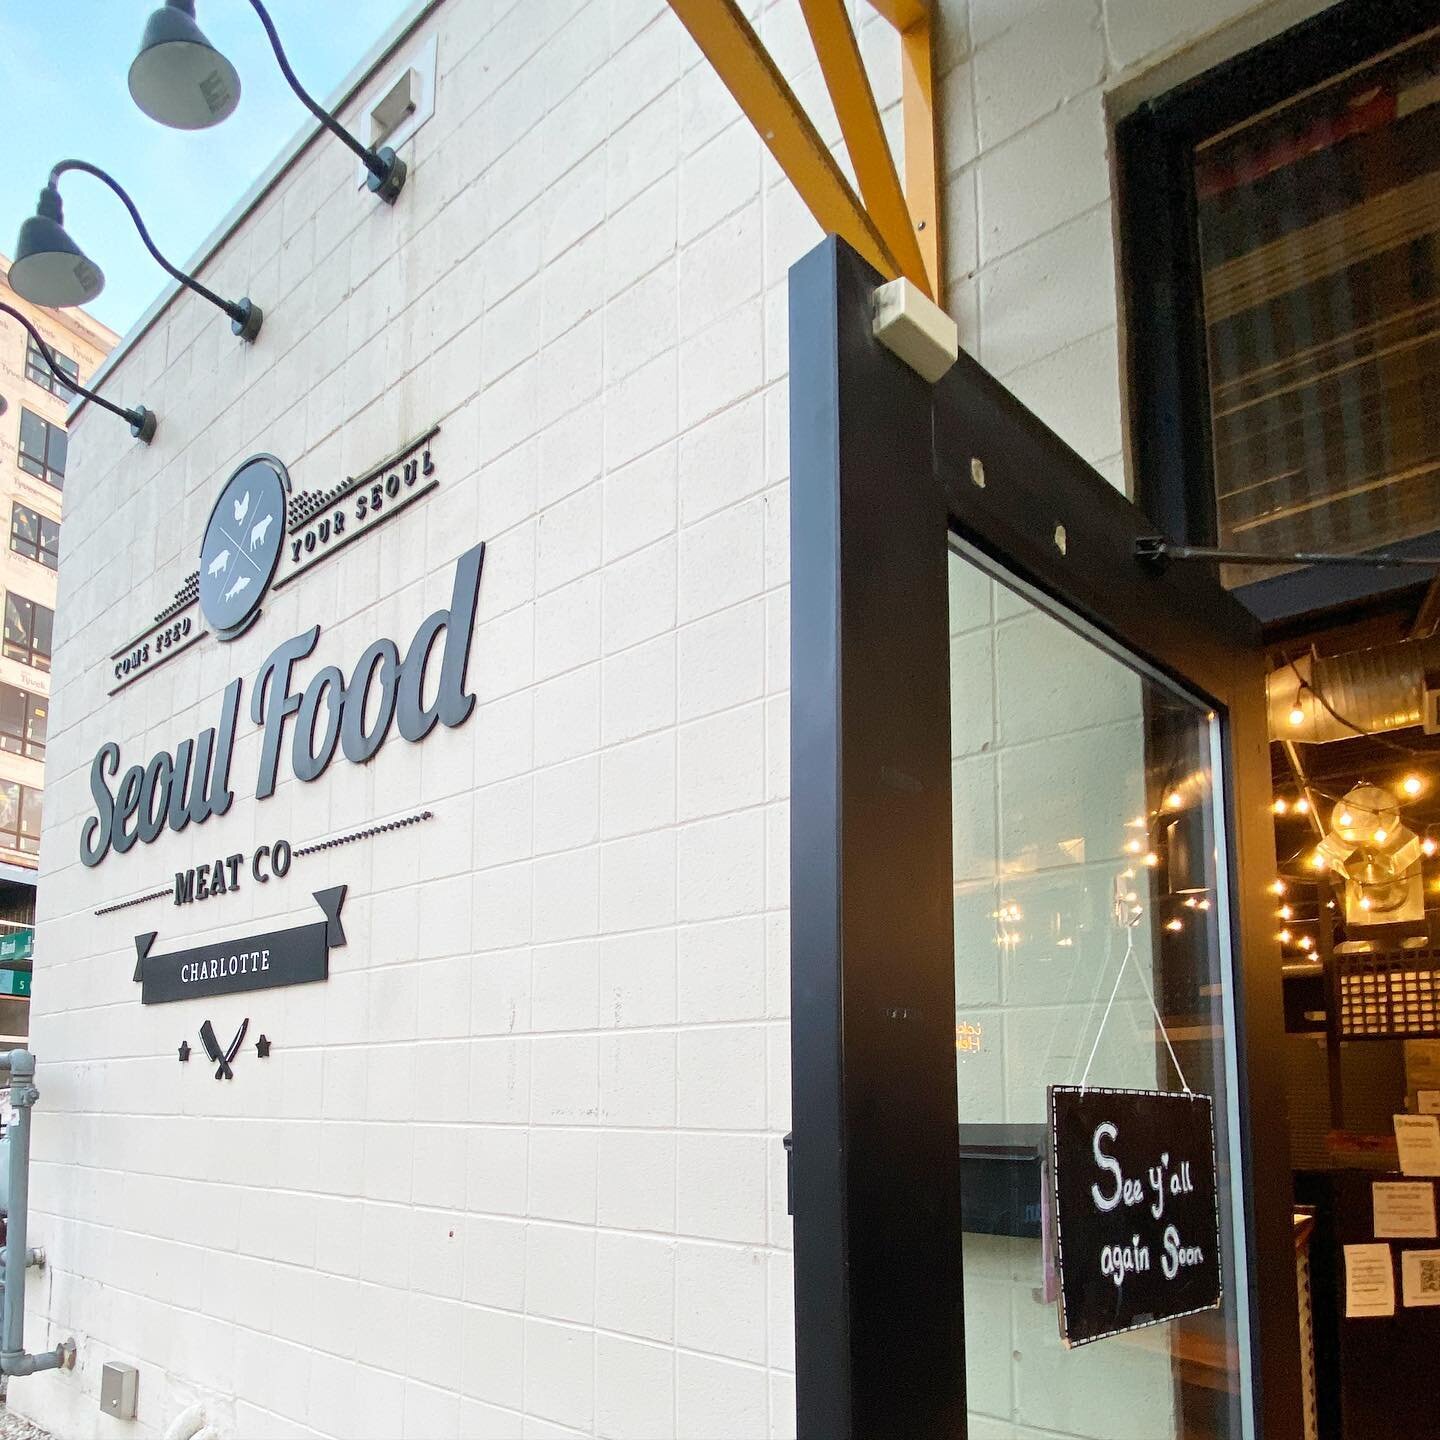 **FILMING IN PROGRESS** A camera crew will be at Seoul Food - South End (1400 S Church St) on Saturday, June 3 from 11:30am-1:30pm to film for an upcoming tv show. Come join us for lunch! And smile as you get your Seoul Food faves. 😎 🎥
.
#filmingin